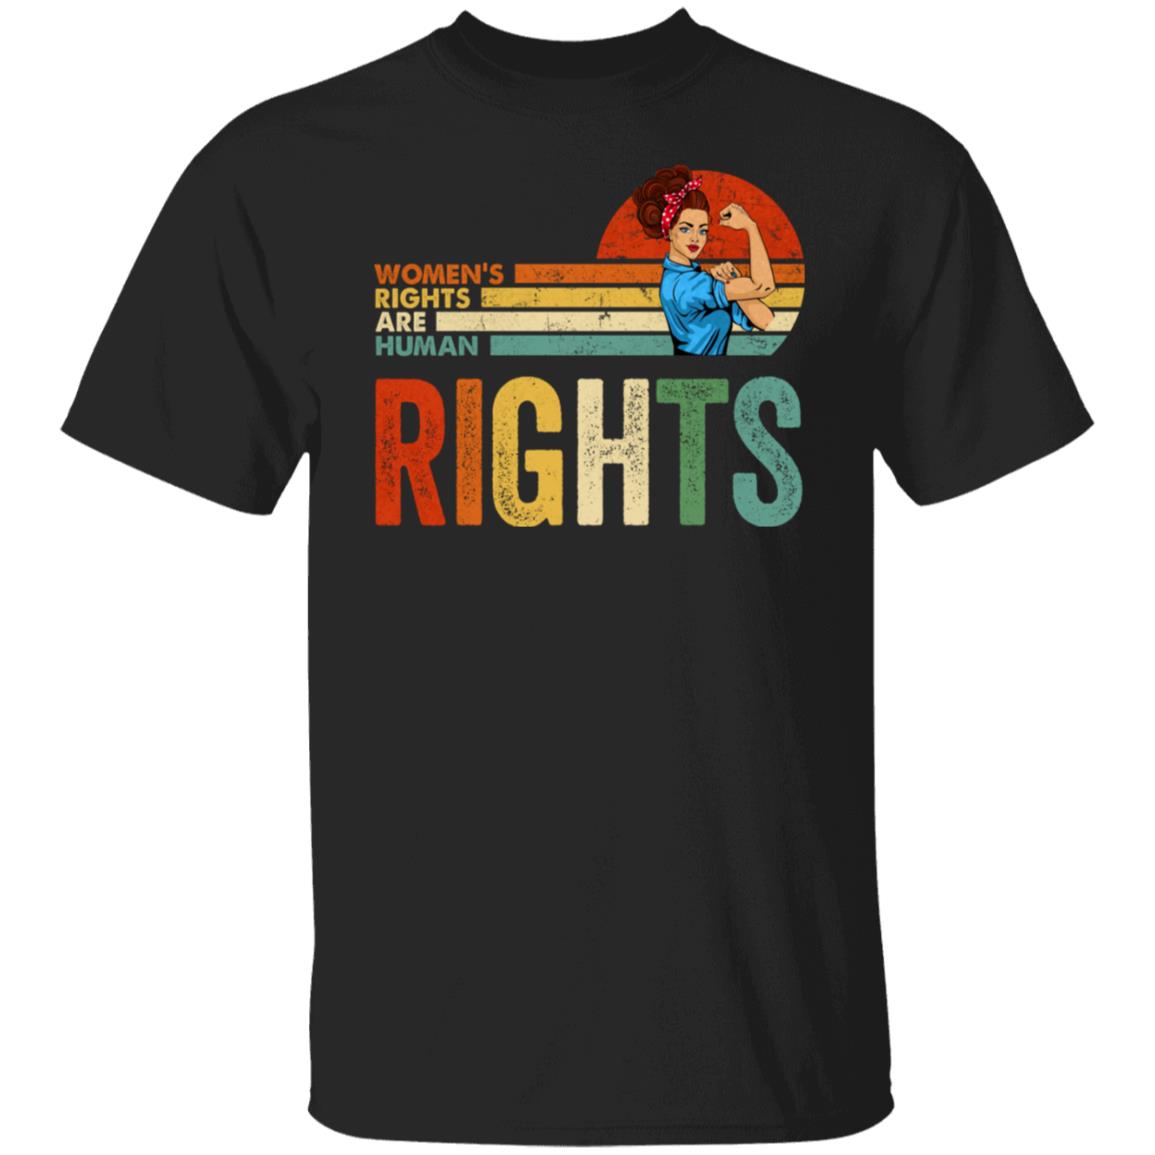 women's rights are human rights shirt support for women feminist female vintage rosie shirt